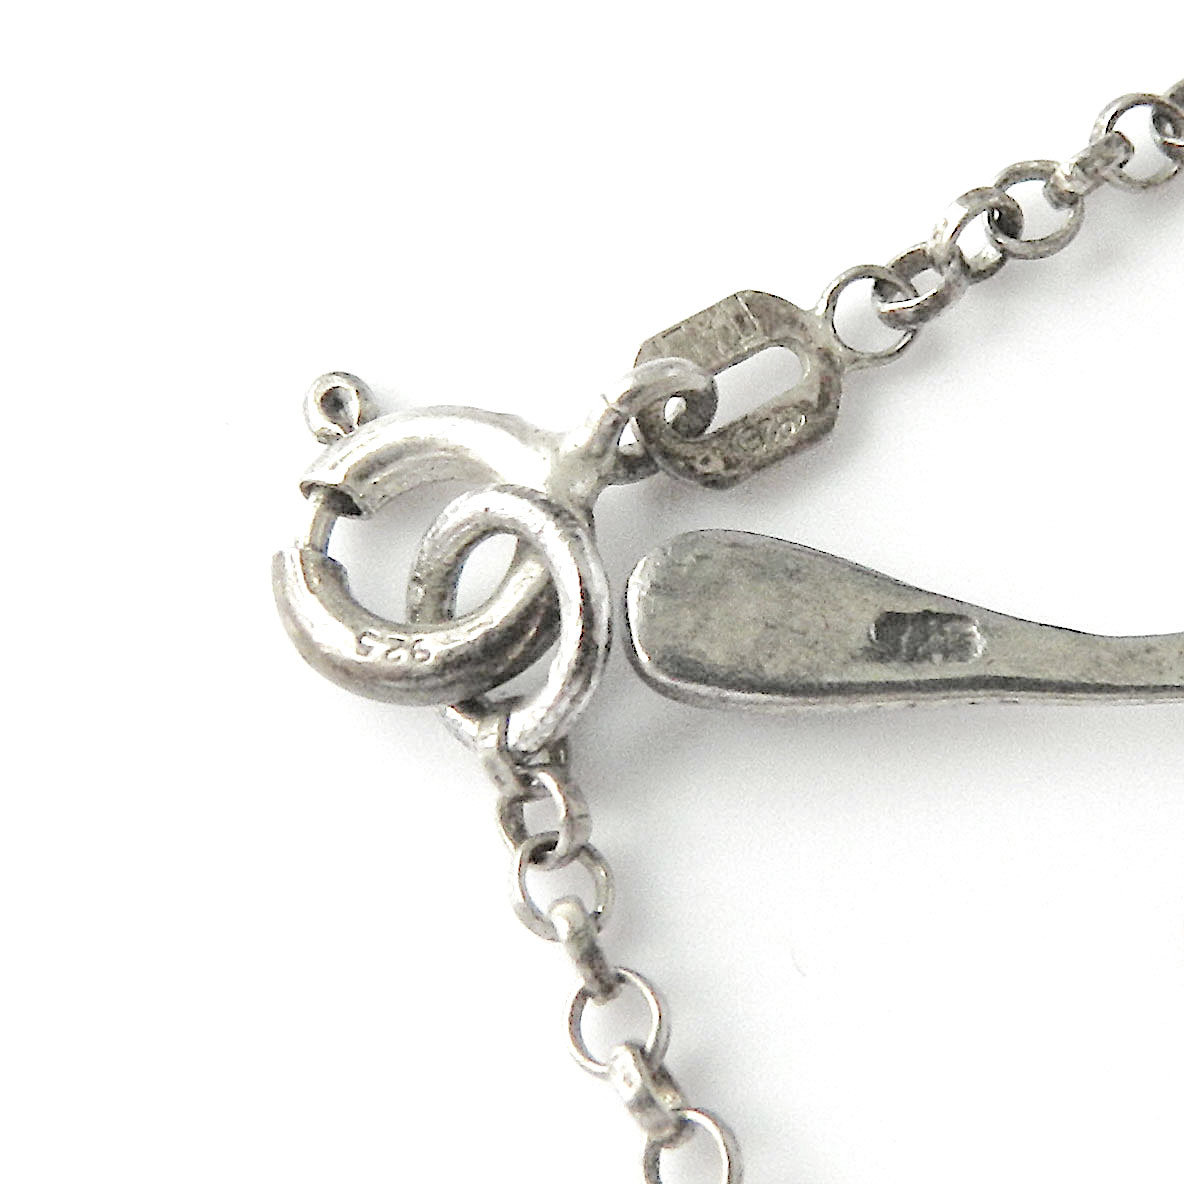 Sterling silver gecko pendant necklace